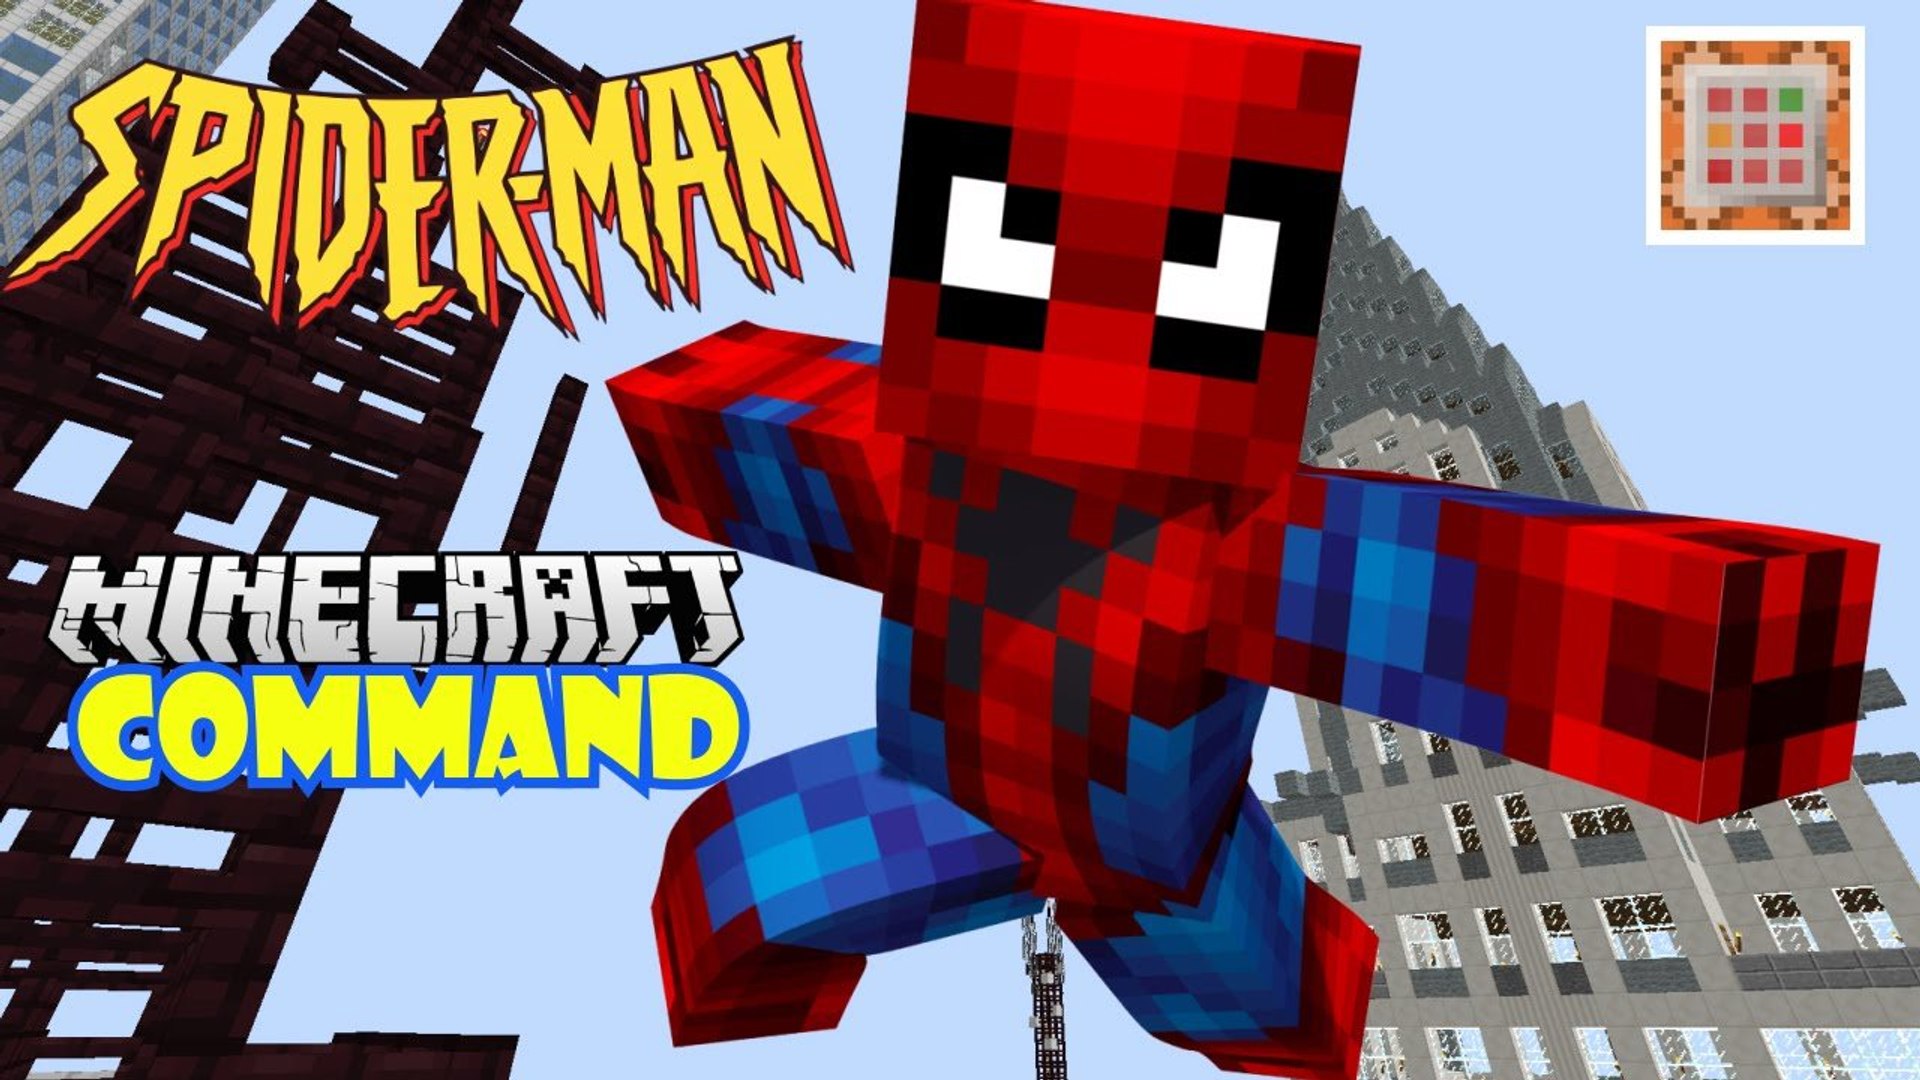 Minecraft SPIDER-MAN One Command Block Creations Gameplay by NikNikamTV -  video Dailymotion